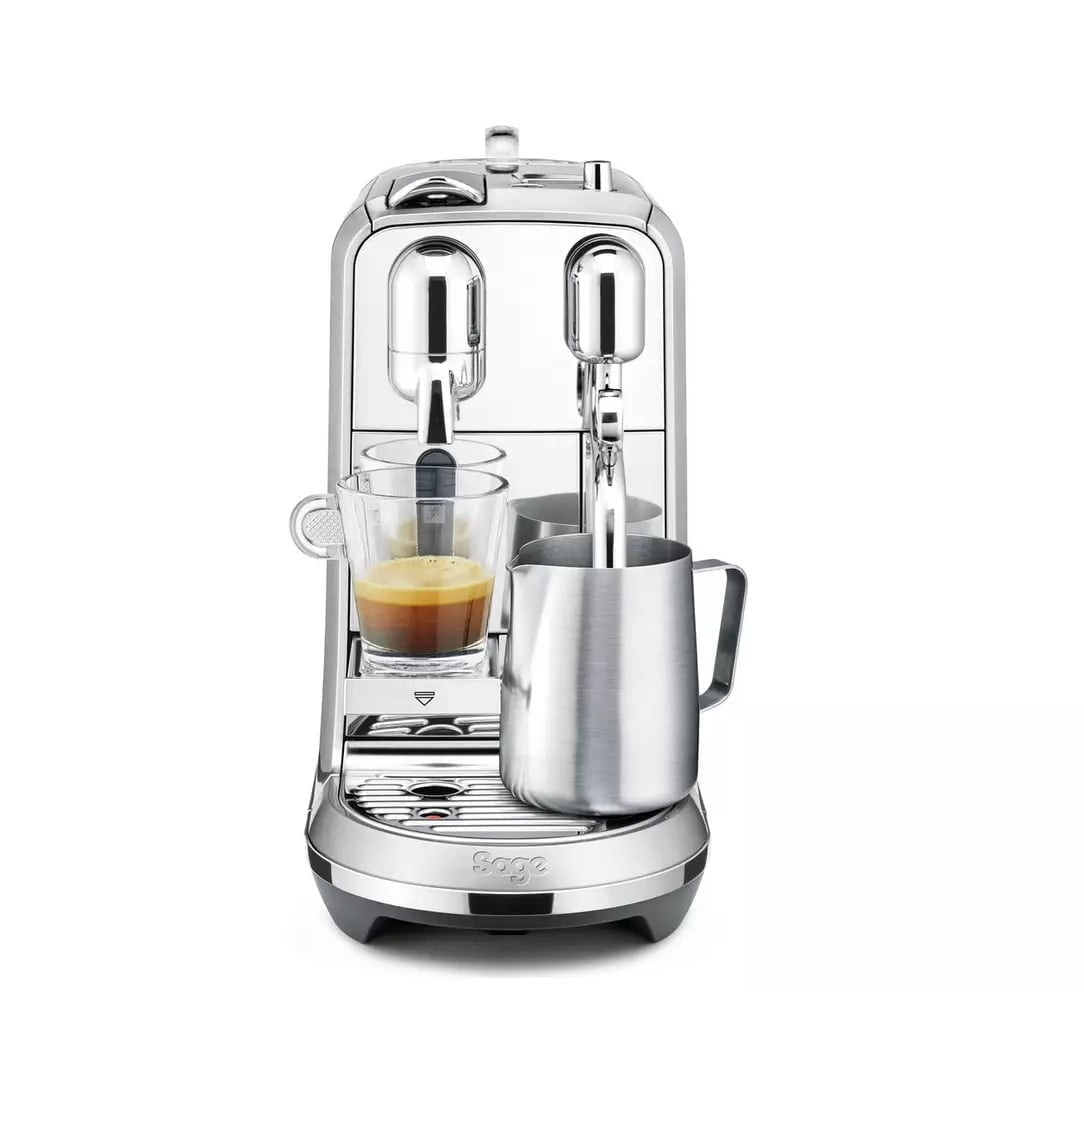 8835538 R Z001A Nespresso &Amp;Lt;H1&Amp;Gt;Nespresso By Sage Creatista Plus Pod Coffee Machine - Steel&Amp;Lt;/H1&Amp;Gt; Https://Www.youtube.com/Watch?V=0Qmamxmrnhu The Nespresso Creatista Plus Gives You The Ability To Easily Create Personalized Café-Style Quality Coffee At Home. With A Stylish Sleek Design And Stainless Steel Finish, The Creatista Plus Has A 3 Second Heat Up Time, 8 Texture Levels And 11 Milk Temperature Settings. Each Machine Includes A Stainless Steel Milk Jug. Available Settings: 3 Coffee Volume Settings (From 25 To 150 Ml), 8 Milk Texture/Froth Settings (From 2 To 30 Mm) And 9 Milk Temperature Settings (From 55 To 75C). Comes With A 480Ml Stainless Steel Milk Jug, Pop Out Cup Support, Removable Drip Grid And Removable Drip Tray. &Amp;Lt;Ul&Amp;Gt; &Amp;Lt;Li&Amp;Gt;Coffee Options Include: Espresso, Cappuccino, Latte, Ristretto, Lungo, And Latte Macchiato.&Amp;Lt;/Li&Amp;Gt; &Amp;Lt;Li&Amp;Gt;Compatible With Nespresso Original Capsules.&Amp;Lt;/Li&Amp;Gt; &Amp;Lt;Li&Amp;Gt;Recyclable Pods.&Amp;Lt;/Li&Amp;Gt; &Amp;Lt;Li&Amp;Gt;Strength Selector - To Tailor The Strength Of The Coffee To Your Taste.&Amp;Lt;/Li&Amp;Gt; &Amp;Lt;Li&Amp;Gt;Milk Frother Included.&Amp;Lt;/Li&Amp;Gt; &Amp;Lt;Li&Amp;Gt;Incorporated Crema Device.&Amp;Lt;/Li&Amp;Gt; &Amp;Lt;Li&Amp;Gt;19 Bar Pump Pressure.&Amp;Lt;/Li&Amp;Gt; &Amp;Lt;Li&Amp;Gt;Water Capacity 1.5 Litres.&Amp;Lt;/Li&Amp;Gt; &Amp;Lt;Li&Amp;Gt;Water Level Gauge.&Amp;Lt;/Li&Amp;Gt; &Amp;Lt;Li&Amp;Gt;Transparent Removable Water Tank.&Amp;Lt;/Li&Amp;Gt; &Amp;Lt;Li&Amp;Gt;Adjustable Cup Stand For Any Size Mug.&Amp;Lt;/Li&Amp;Gt; &Amp;Lt;Li&Amp;Gt;Removable Drip Tray.&Amp;Lt;/Li&Amp;Gt; &Amp;Lt;Li&Amp;Gt;Magnetic Pod Holder.&Amp;Lt;/Li&Amp;Gt; &Amp;Lt;Li&Amp;Gt;Auto Shut-Off After 20 Minutes.&Amp;Lt;/Li&Amp;Gt; &Amp;Lt;Li&Amp;Gt;Descale Warning Feature.&Amp;Lt;/Li&Amp;Gt; &Amp;Lt;Li&Amp;Gt;Dishwasher Safe Parts For Effortless Cleaning.&Amp;Lt;/Li&Amp;Gt; &Amp;Lt;/Ul&Amp;Gt; With 14 Capsules Nespresso Nespresso By Sage Creatista Plus Pod Coffee Machine - Steel (With 14 Capsules)